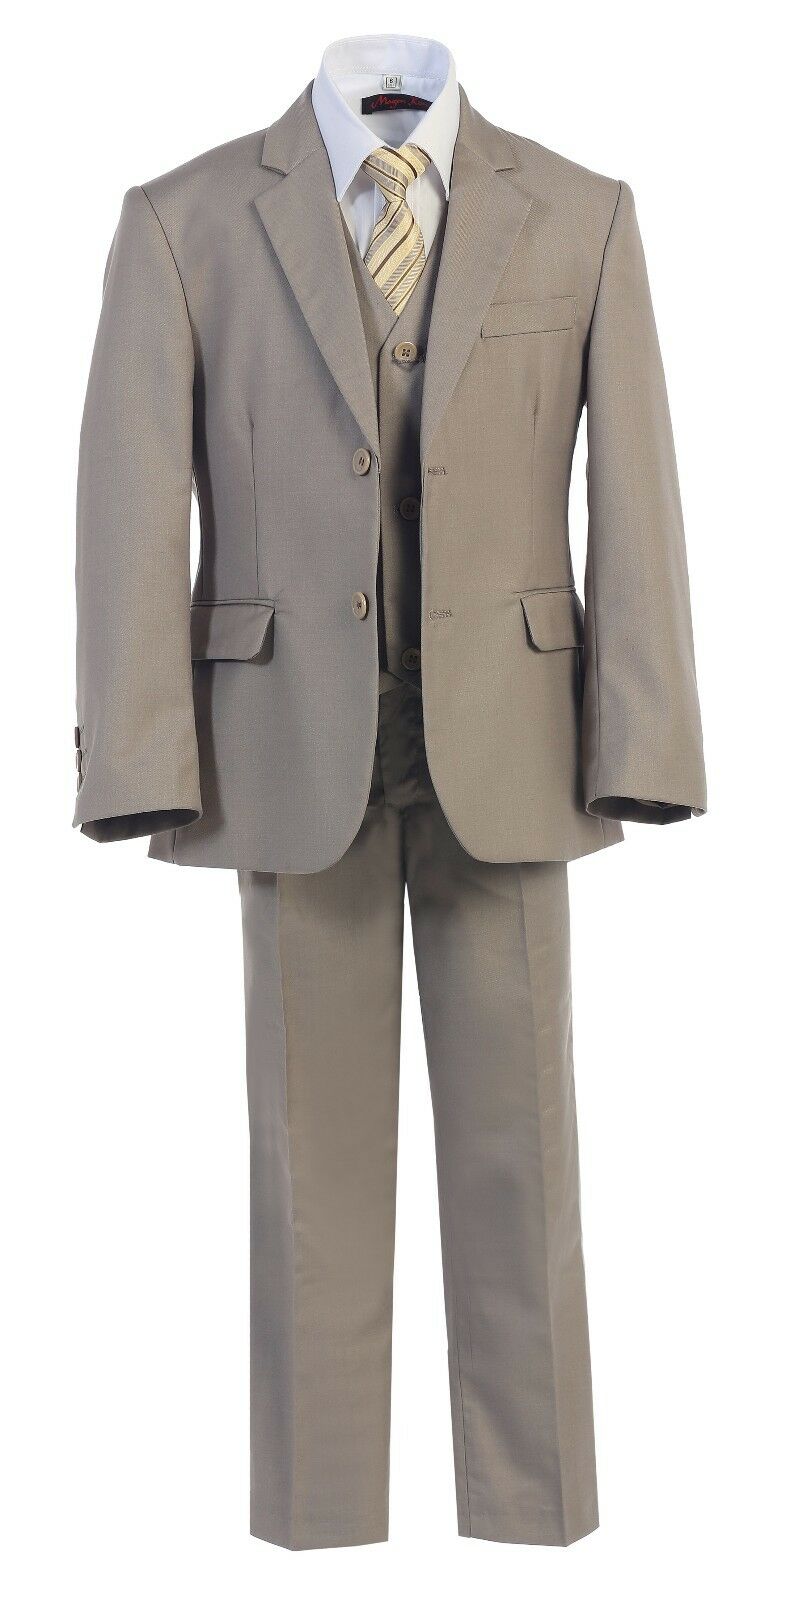 Executive Light Khaki/Beige Suit, a fusion of style and grace for a young man.